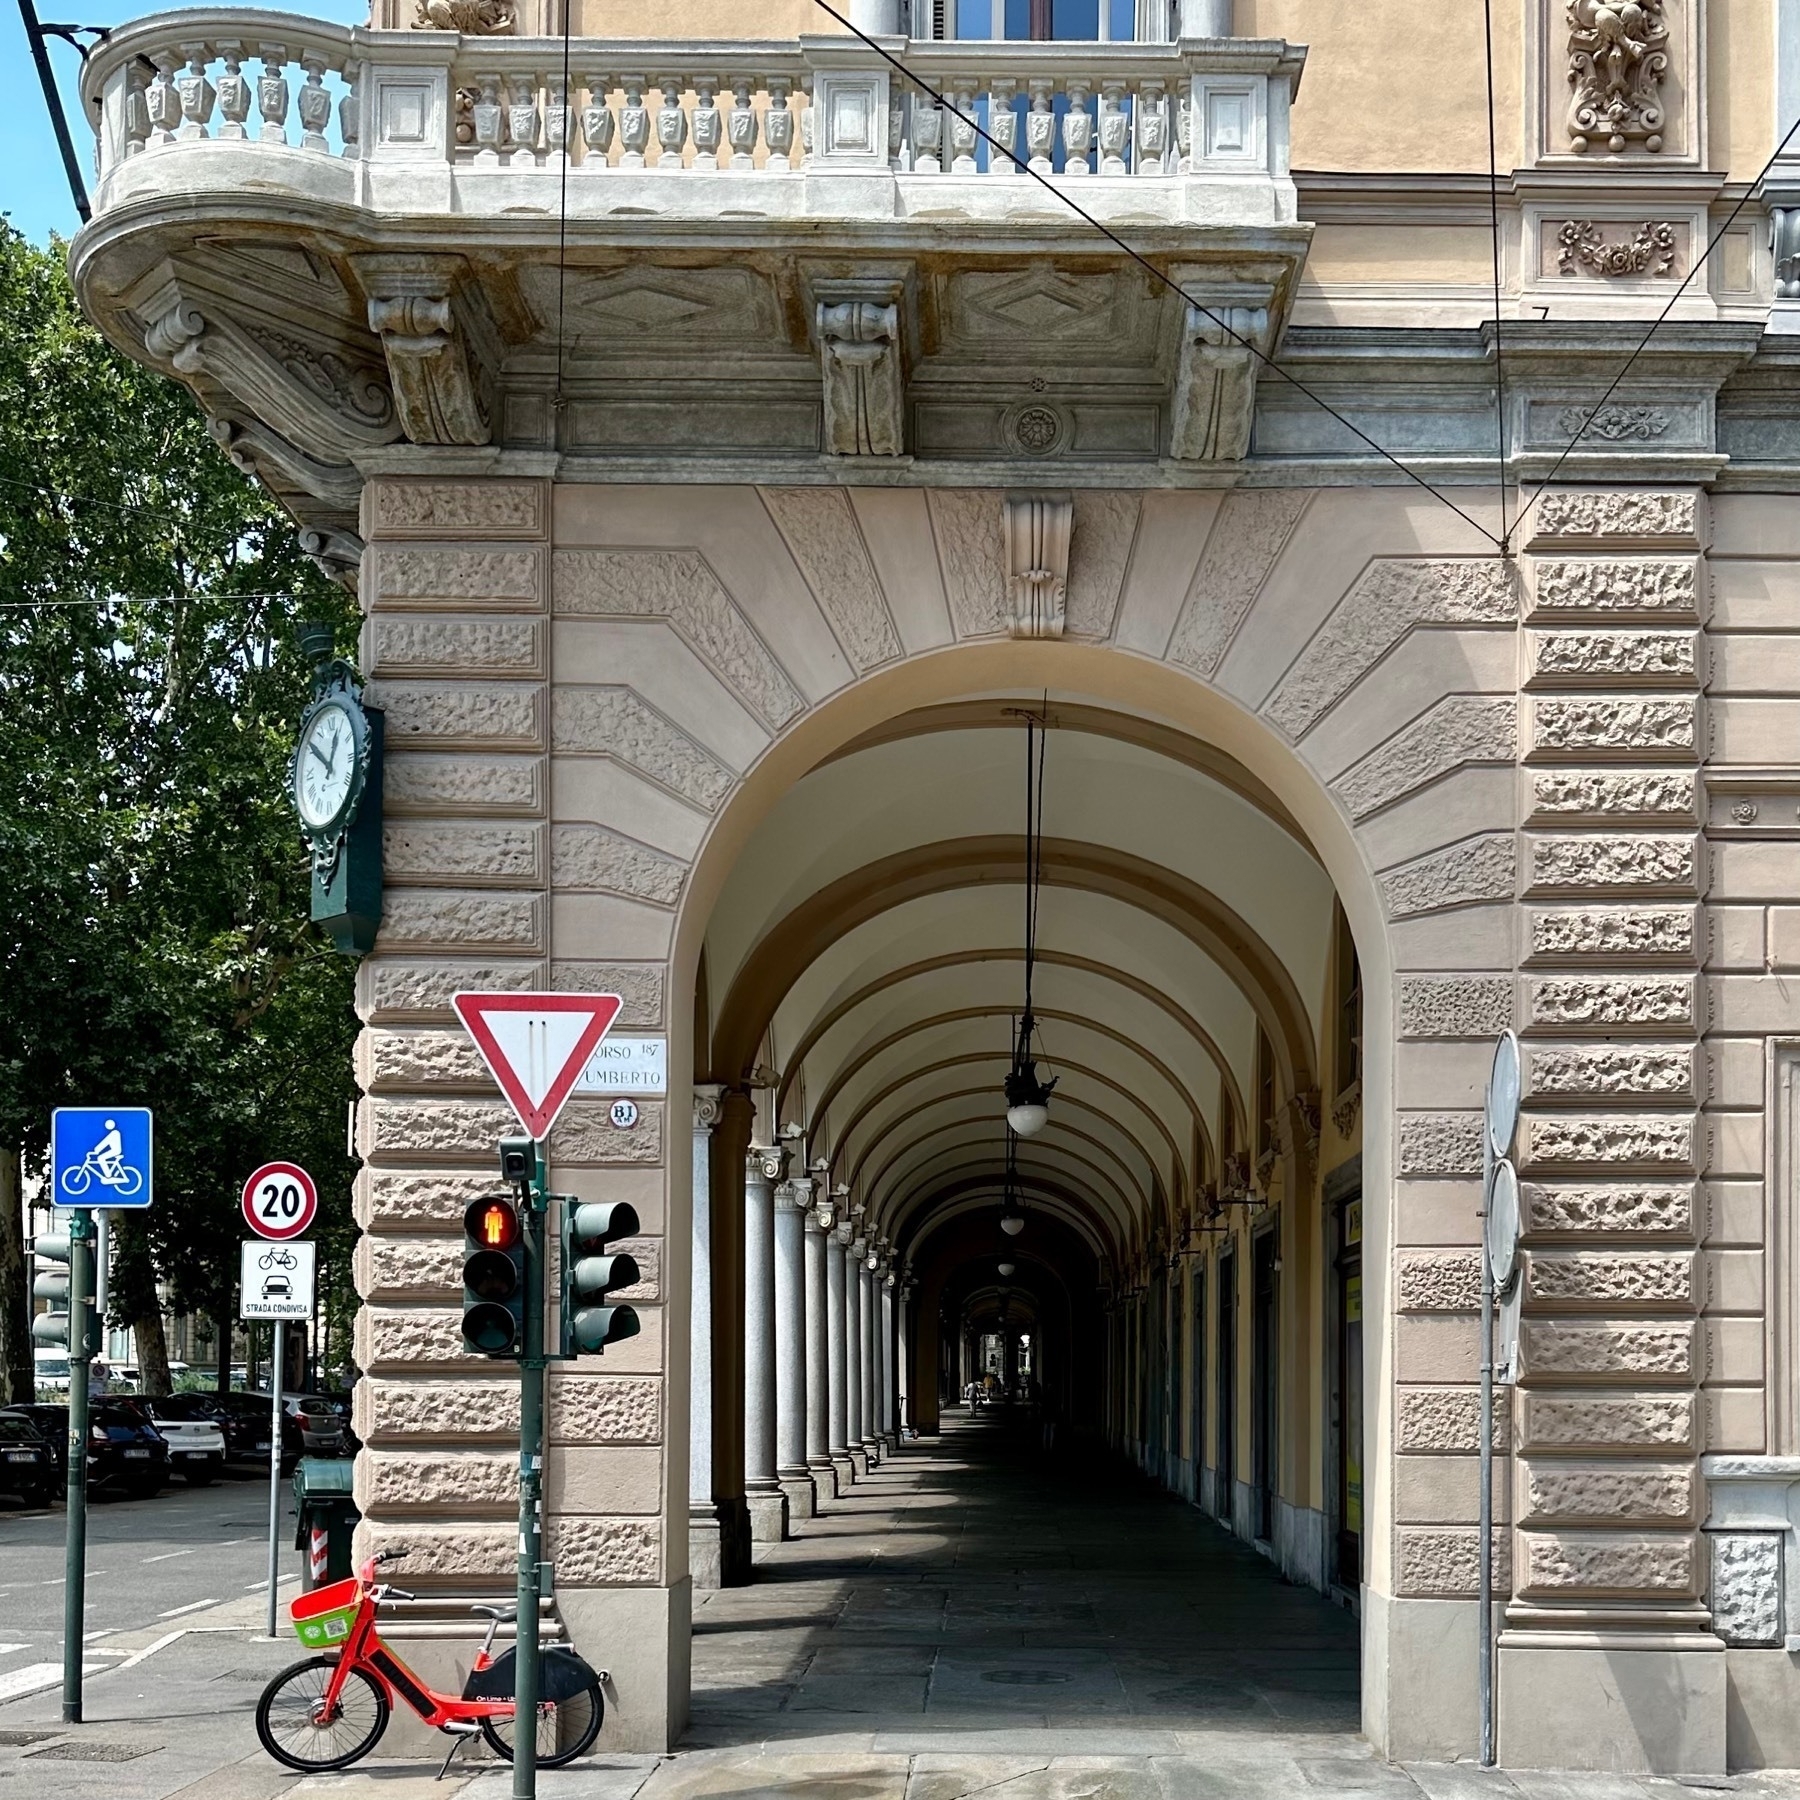 Looking across the street down the covered pedestrian walkway, appearing like a tunnel of arches, with a red public-use bicycle in the foreground